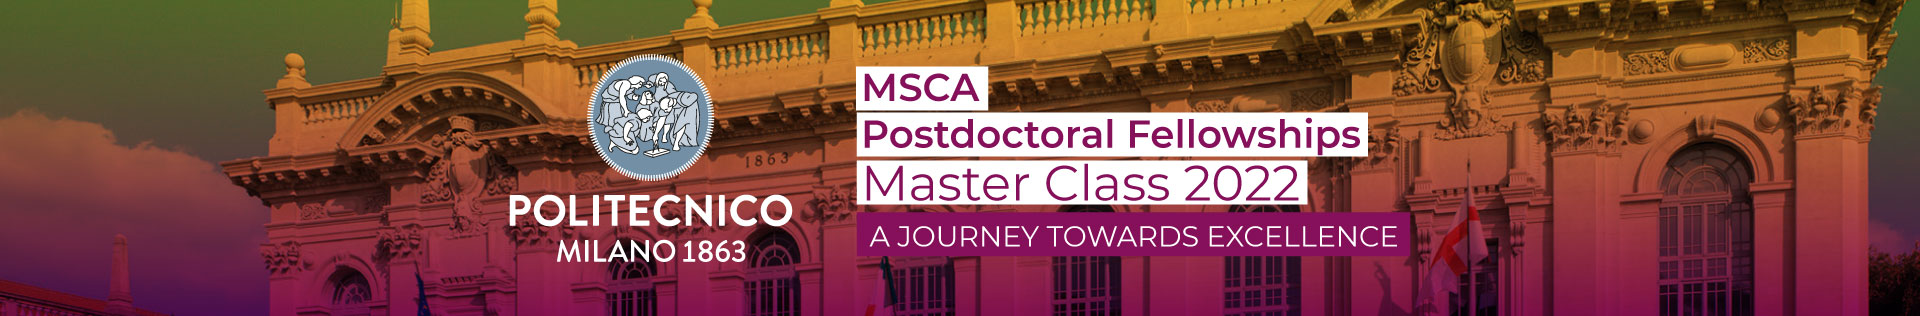 MSCA Postdoctoral Fellowships: Master Class 2022, a journey toward excellence